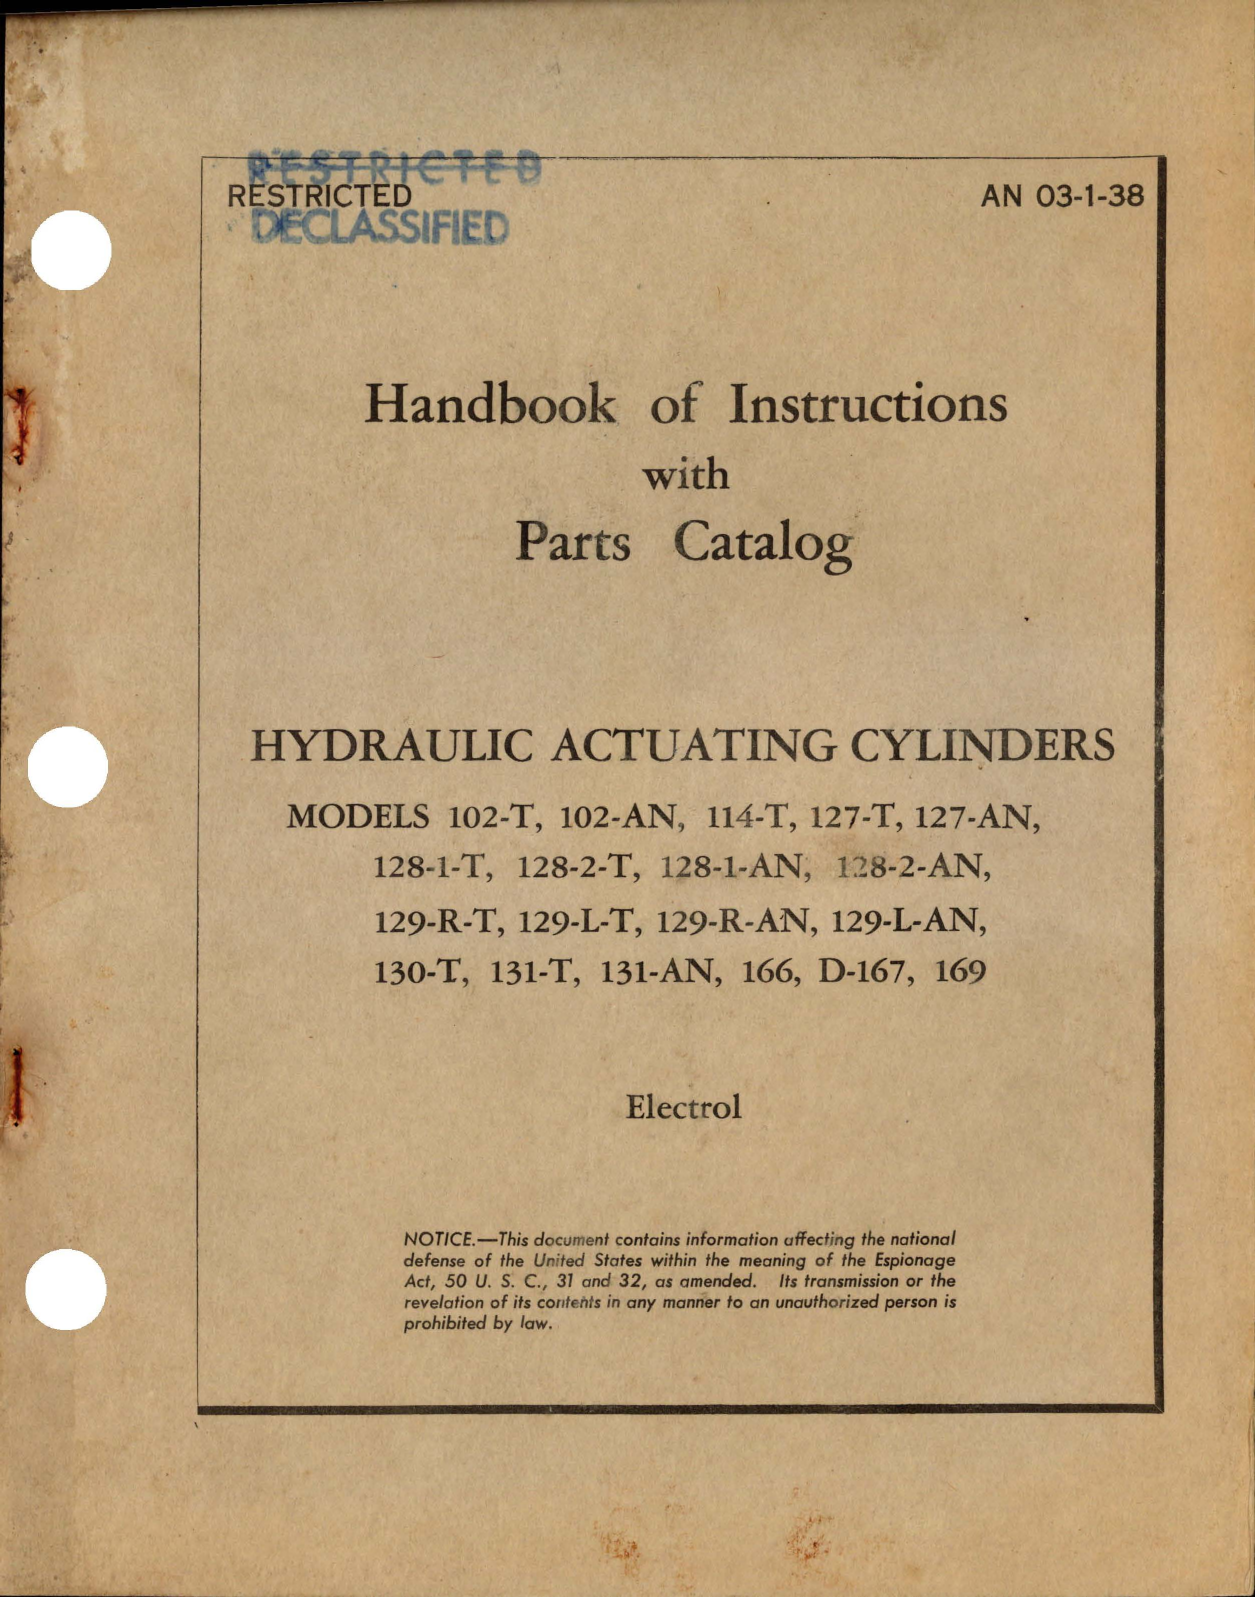 Sample page 1 from AirCorps Library document: Instructions with Parts Catalog for Hydraulic Actuating Cylinders 